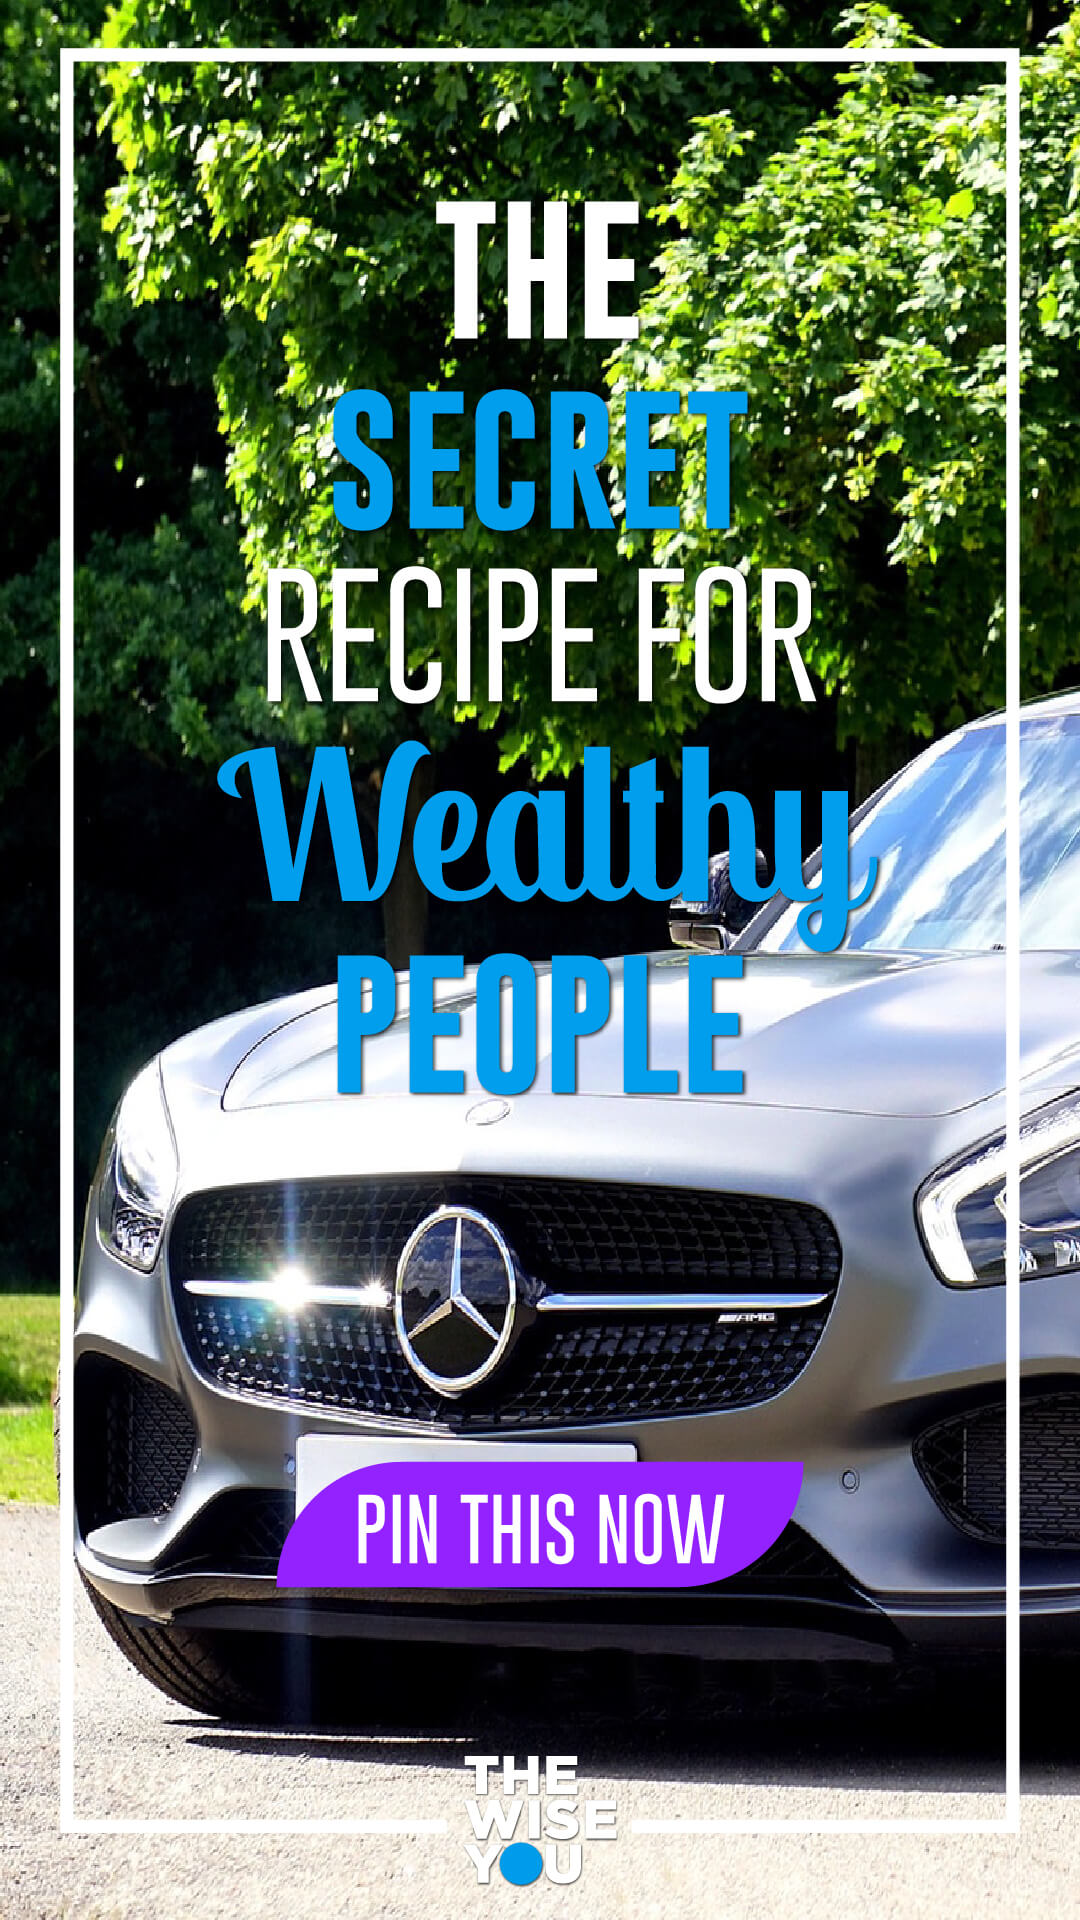 The Secret Recipe For Wealthy People